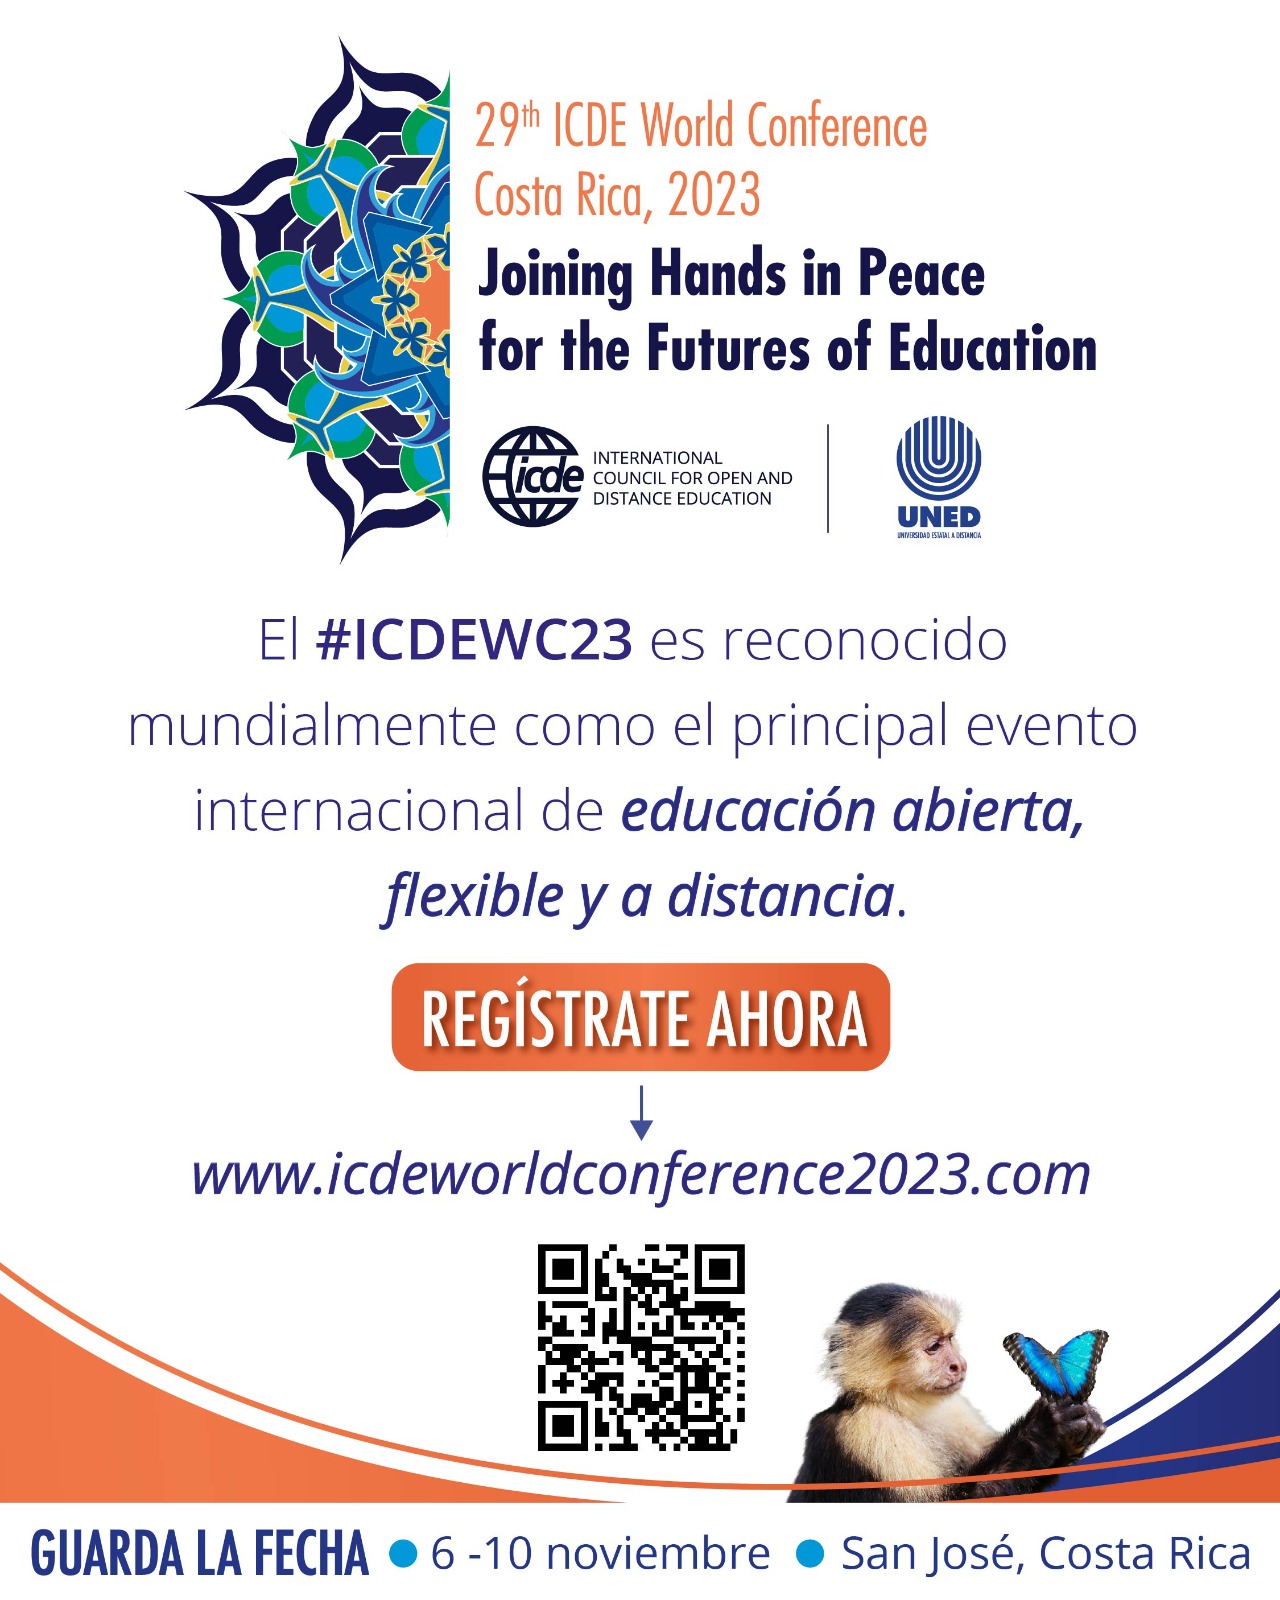 ICDE World Conference 2023